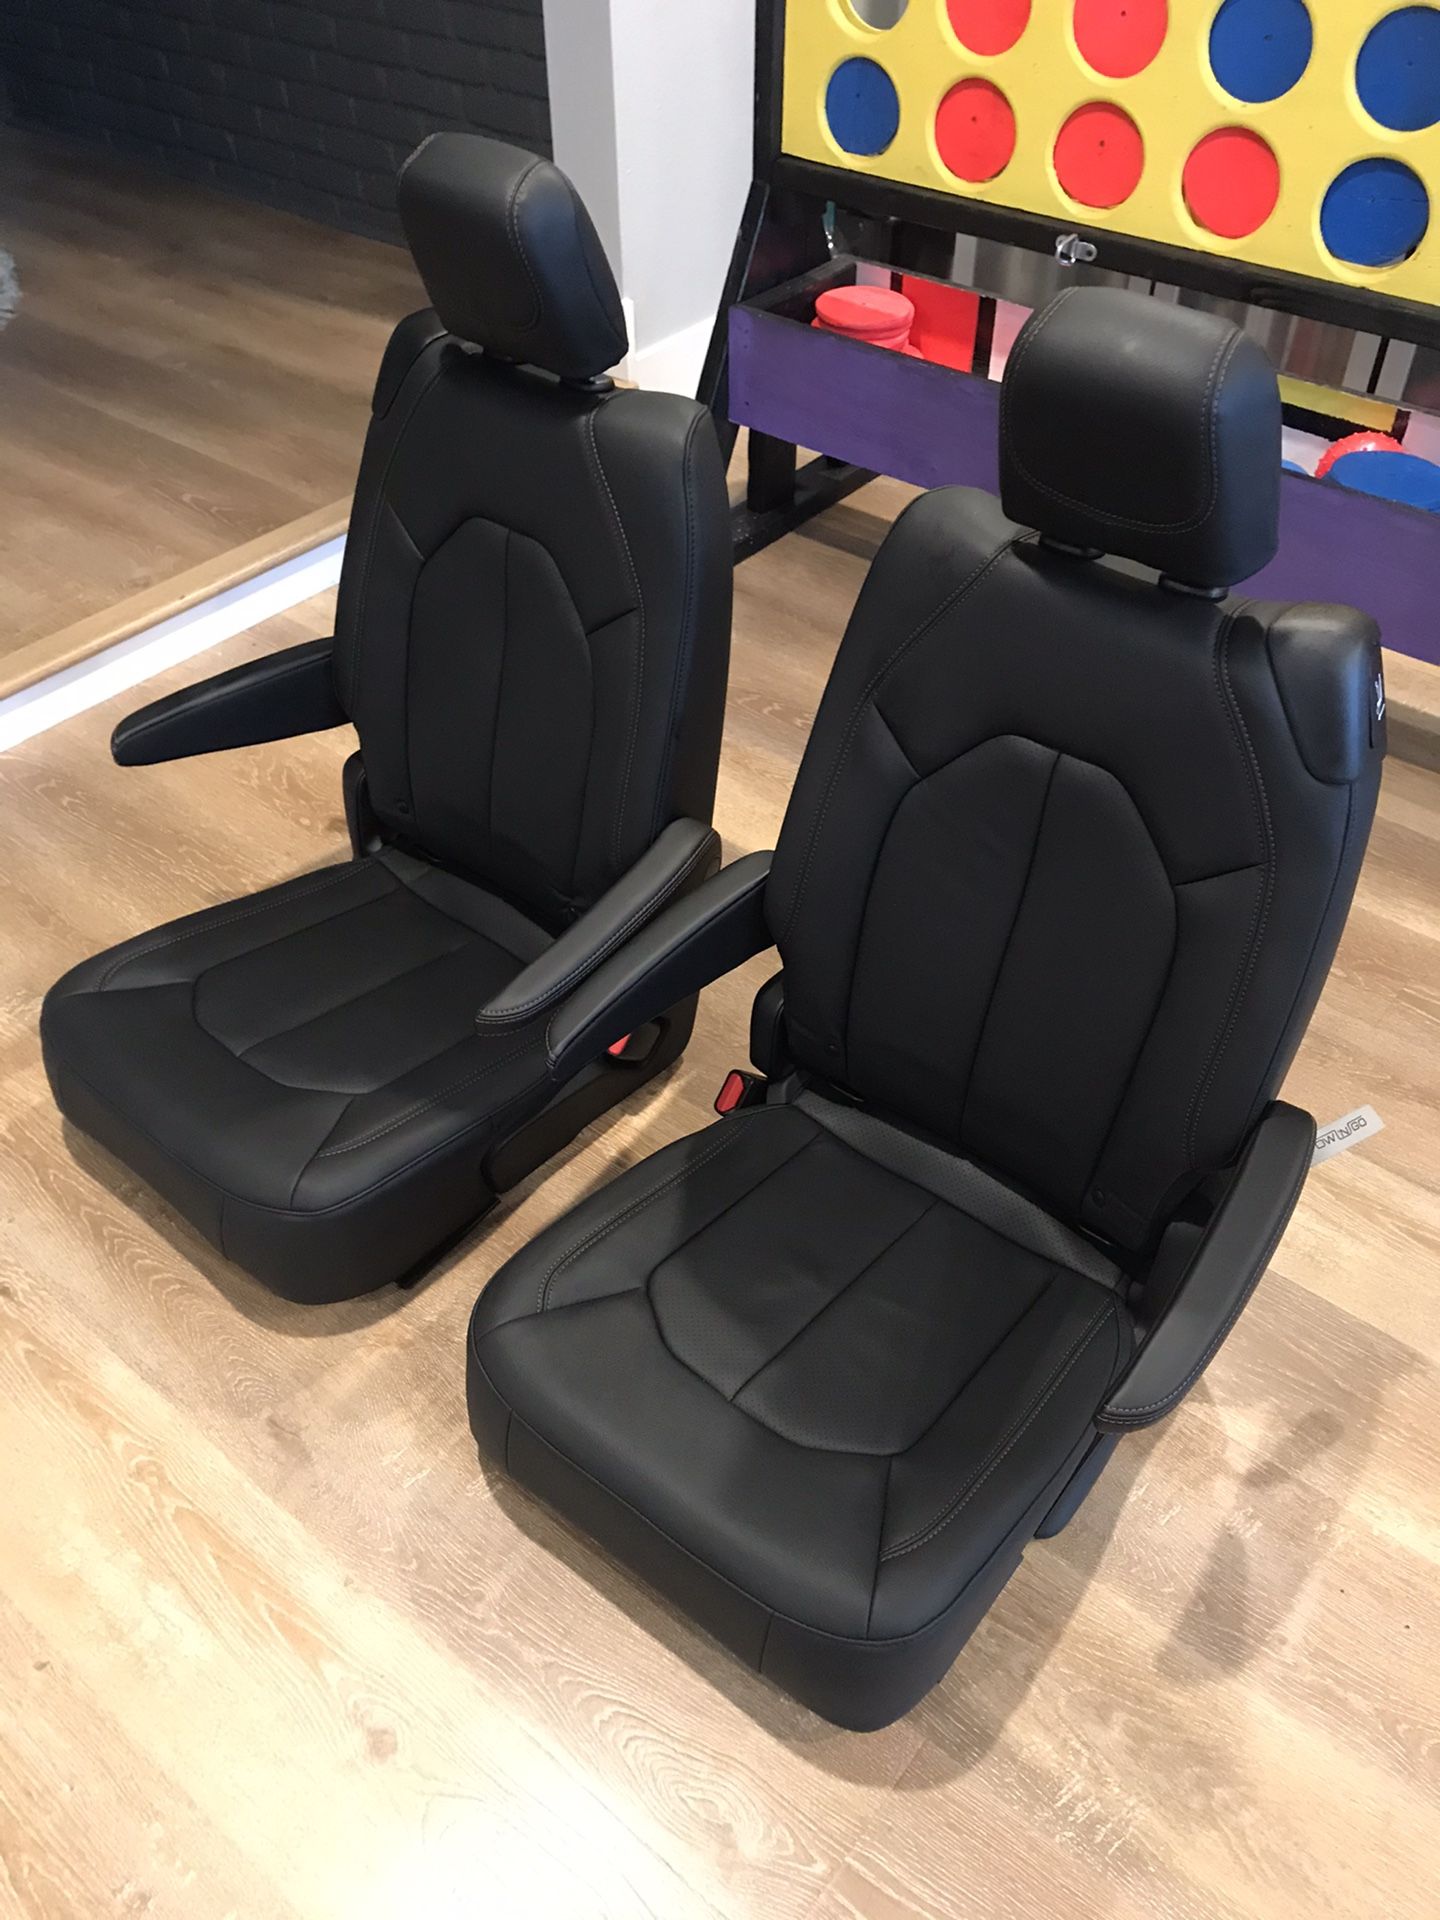 New foldable leather seats for hummer, van conversion, RV, bus, motorhome, truck etc